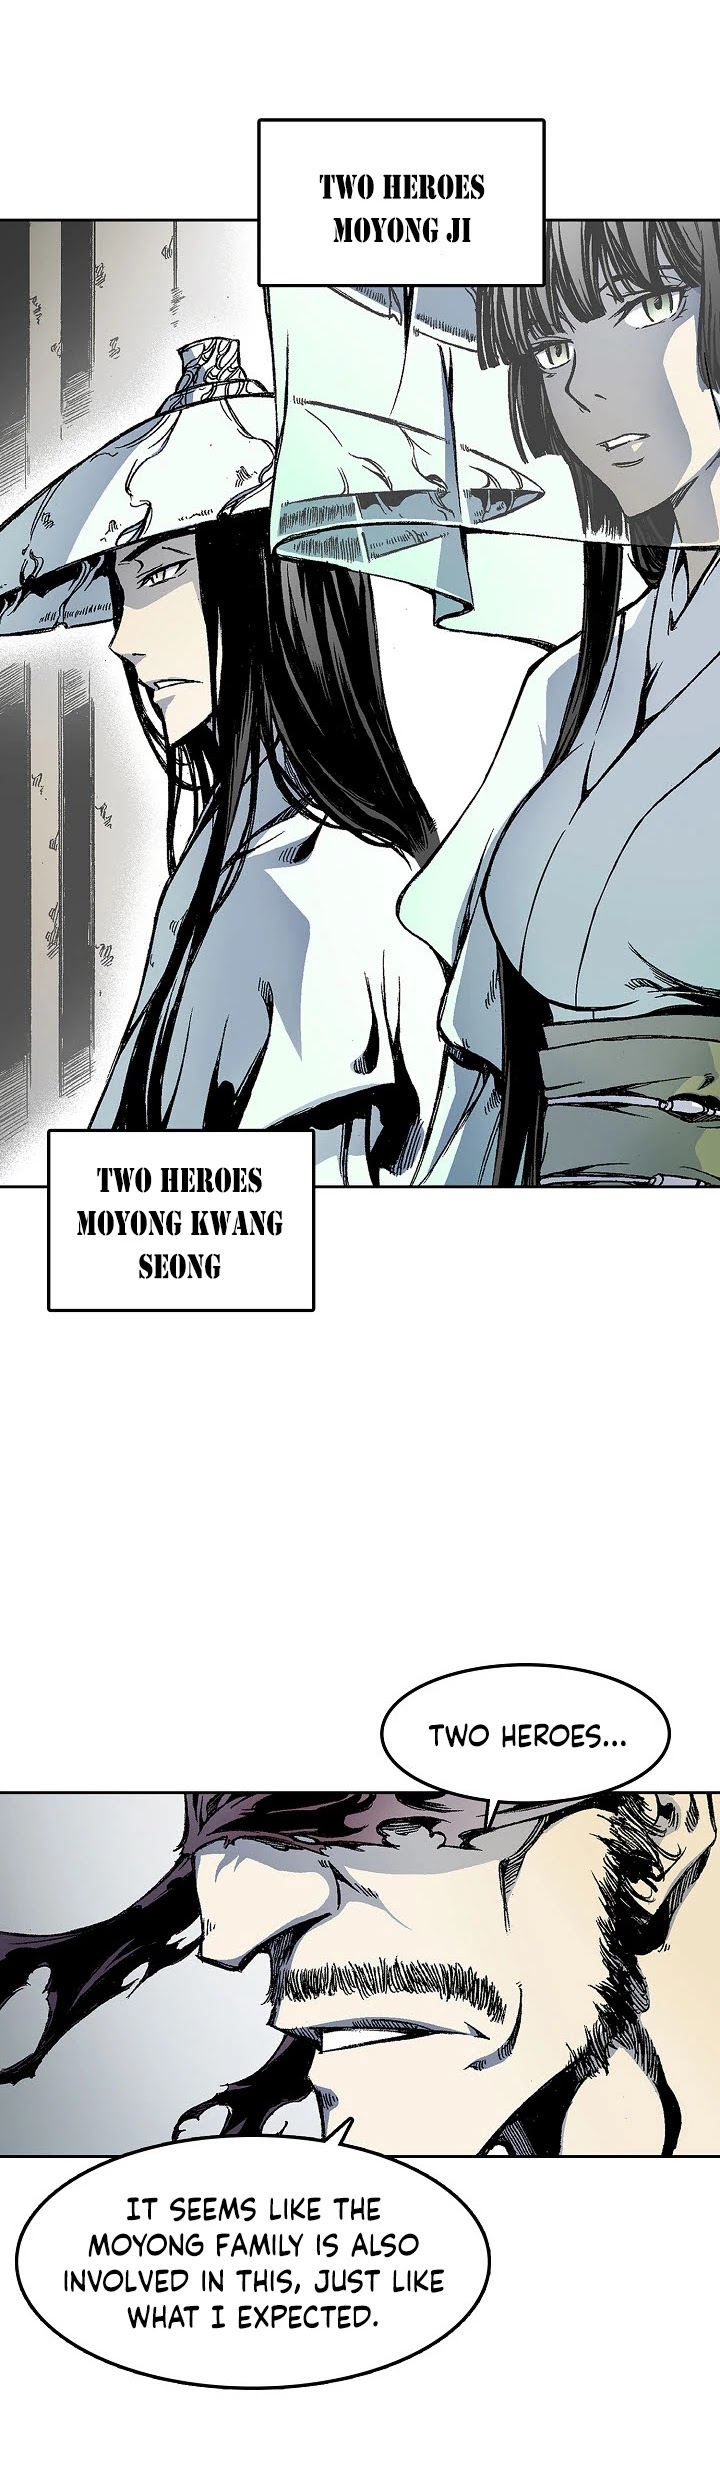 Memoir Of The King Of War chapter 18 - page 25